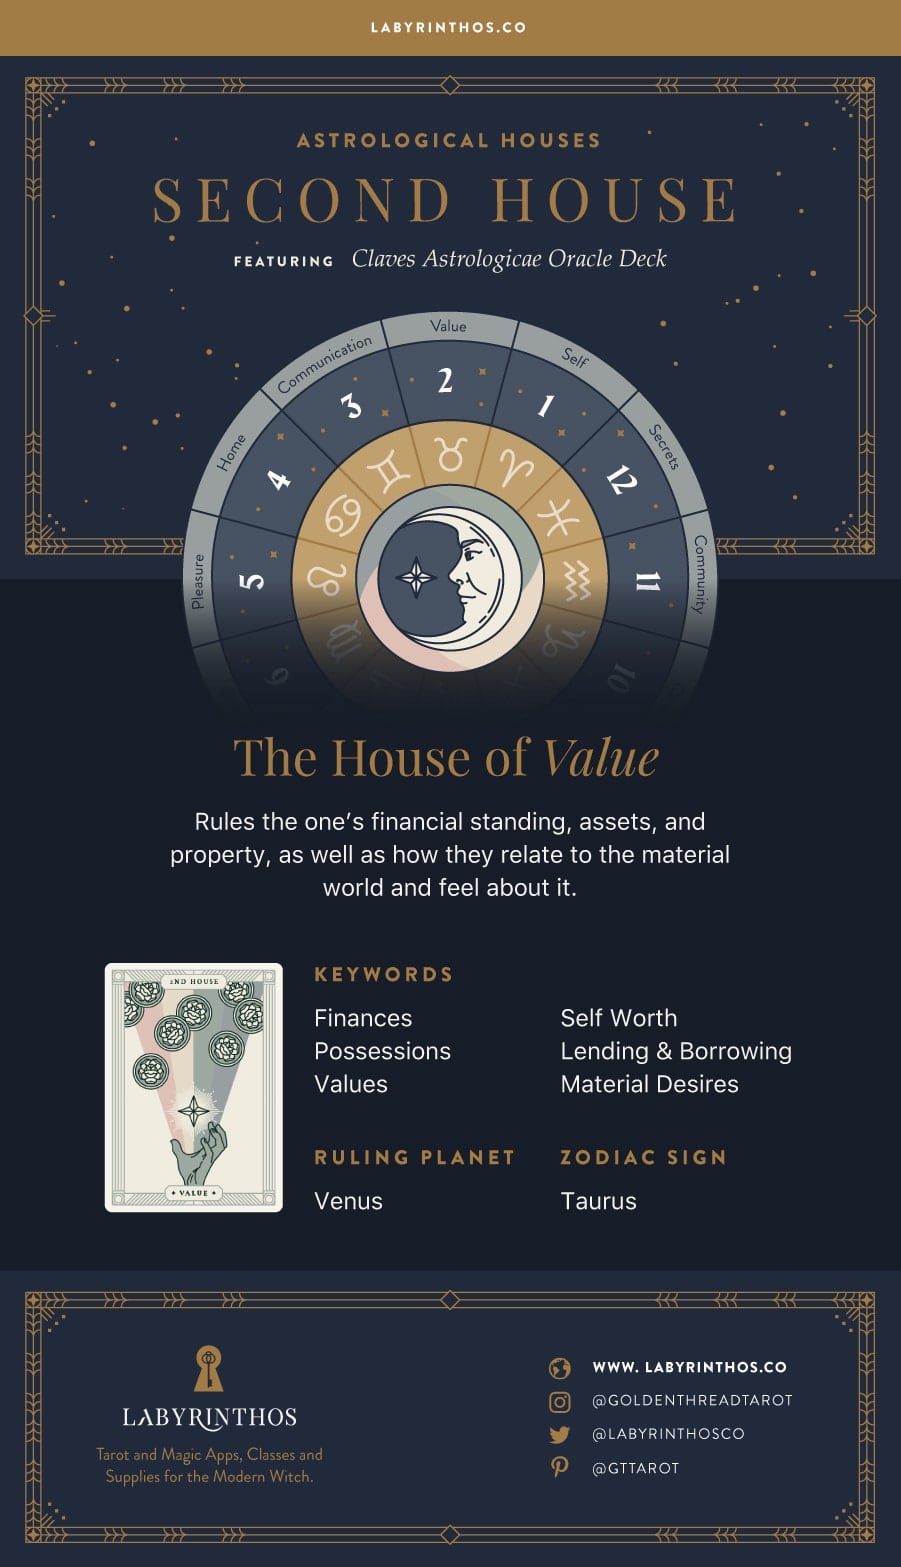 The Second House: The House of Value - the 12 Houses of Astrology Infographic